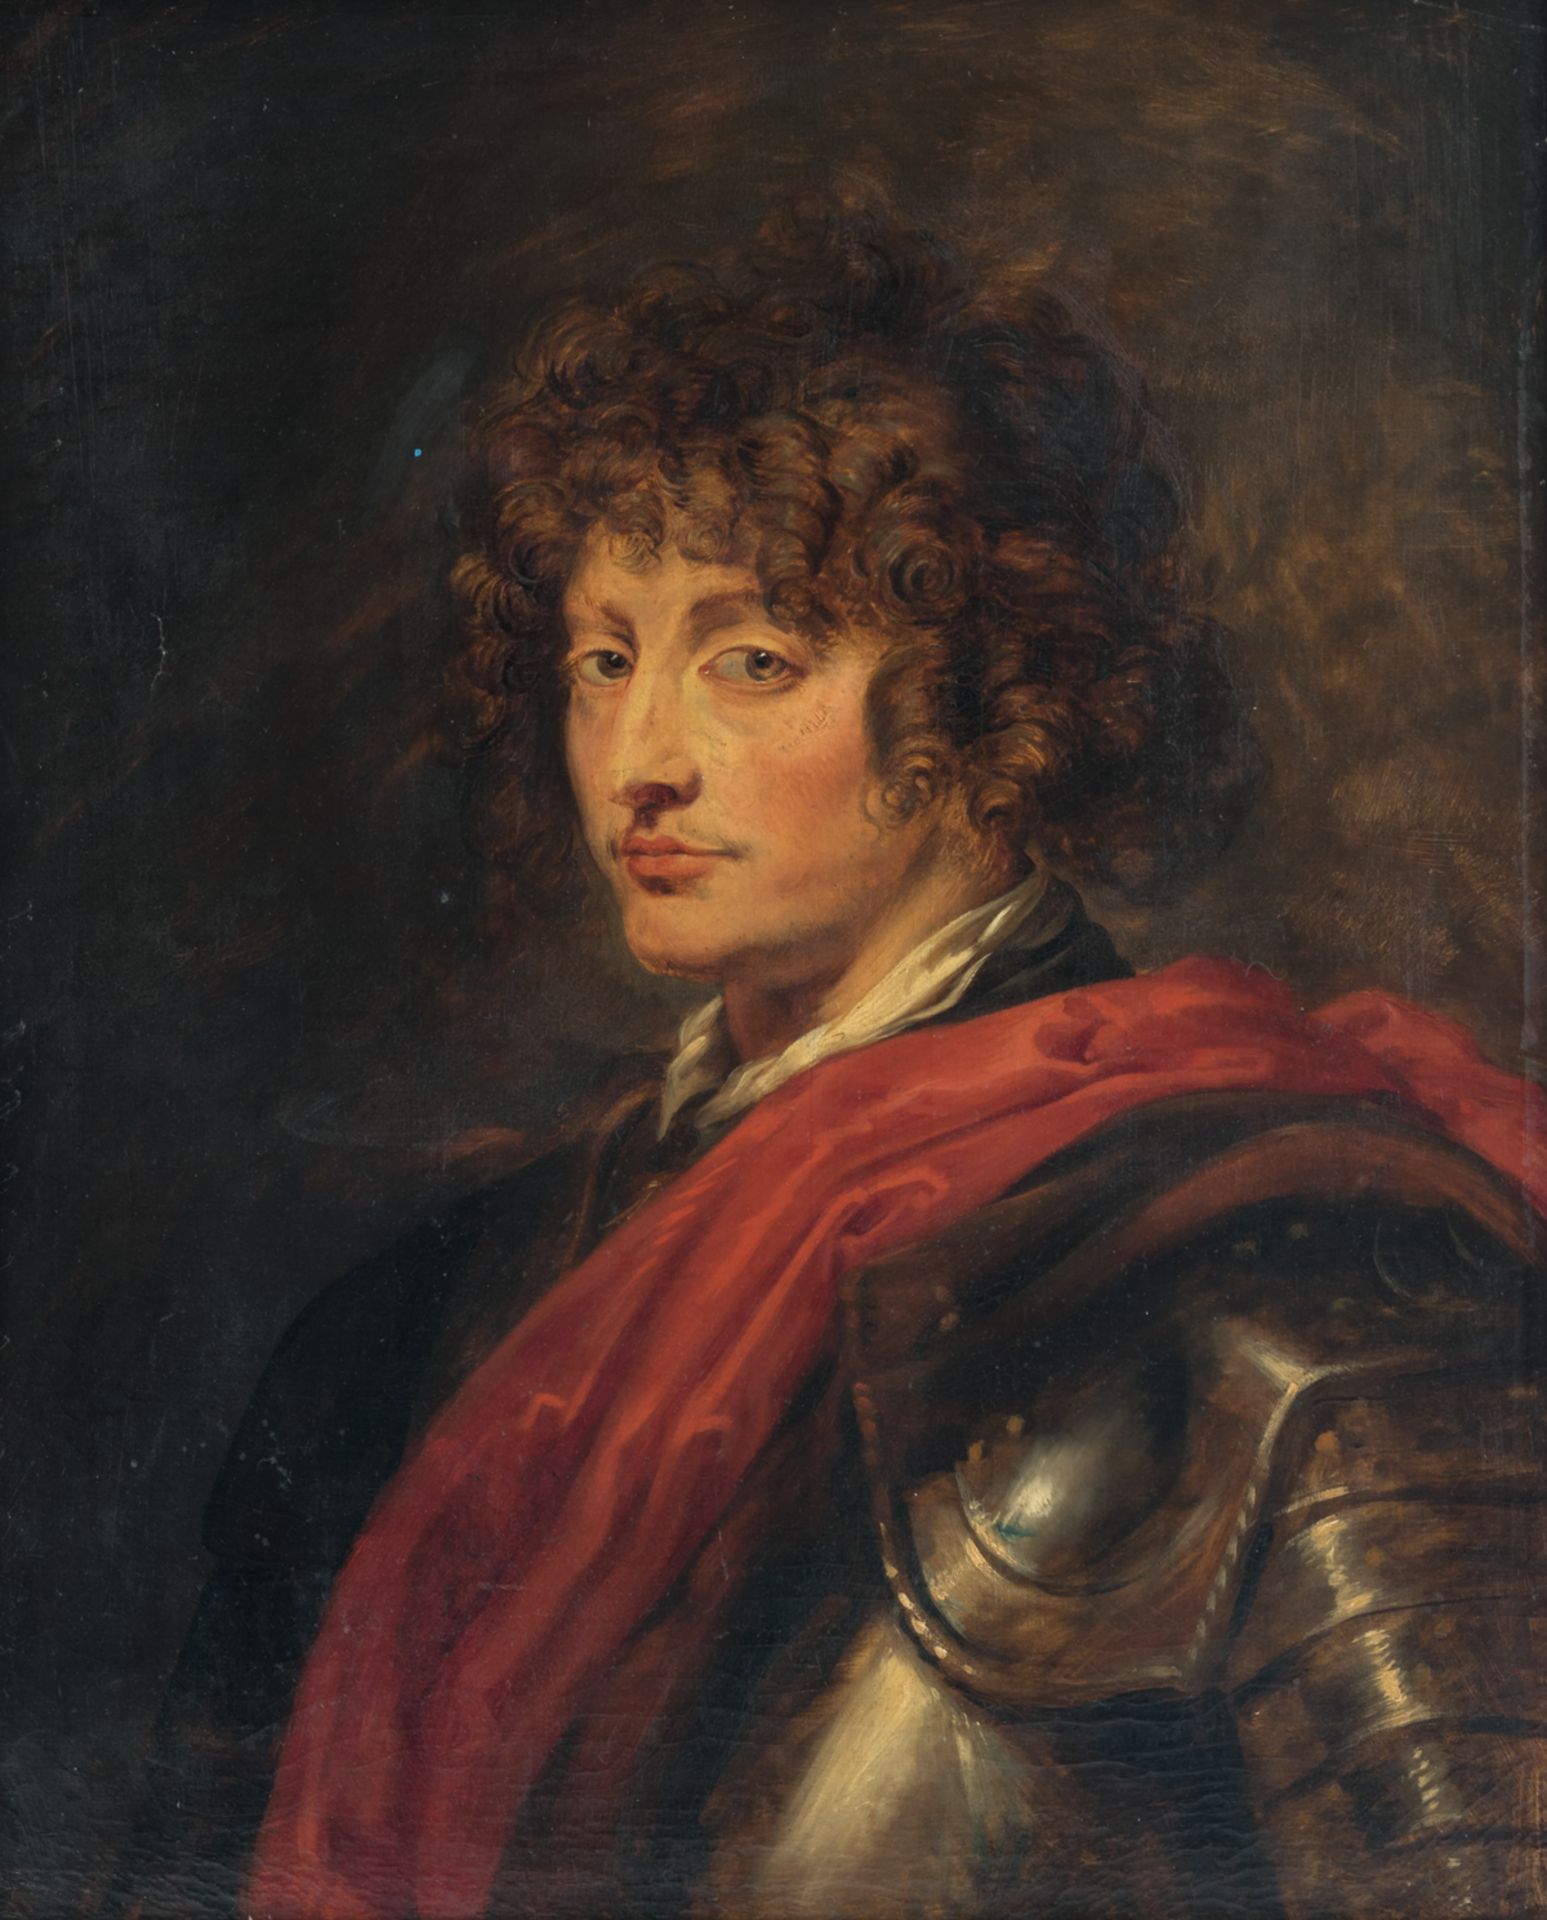 No visible signature, portrait of a noble man in armor, oil on canvas, 18thC, 59 x 72 cm